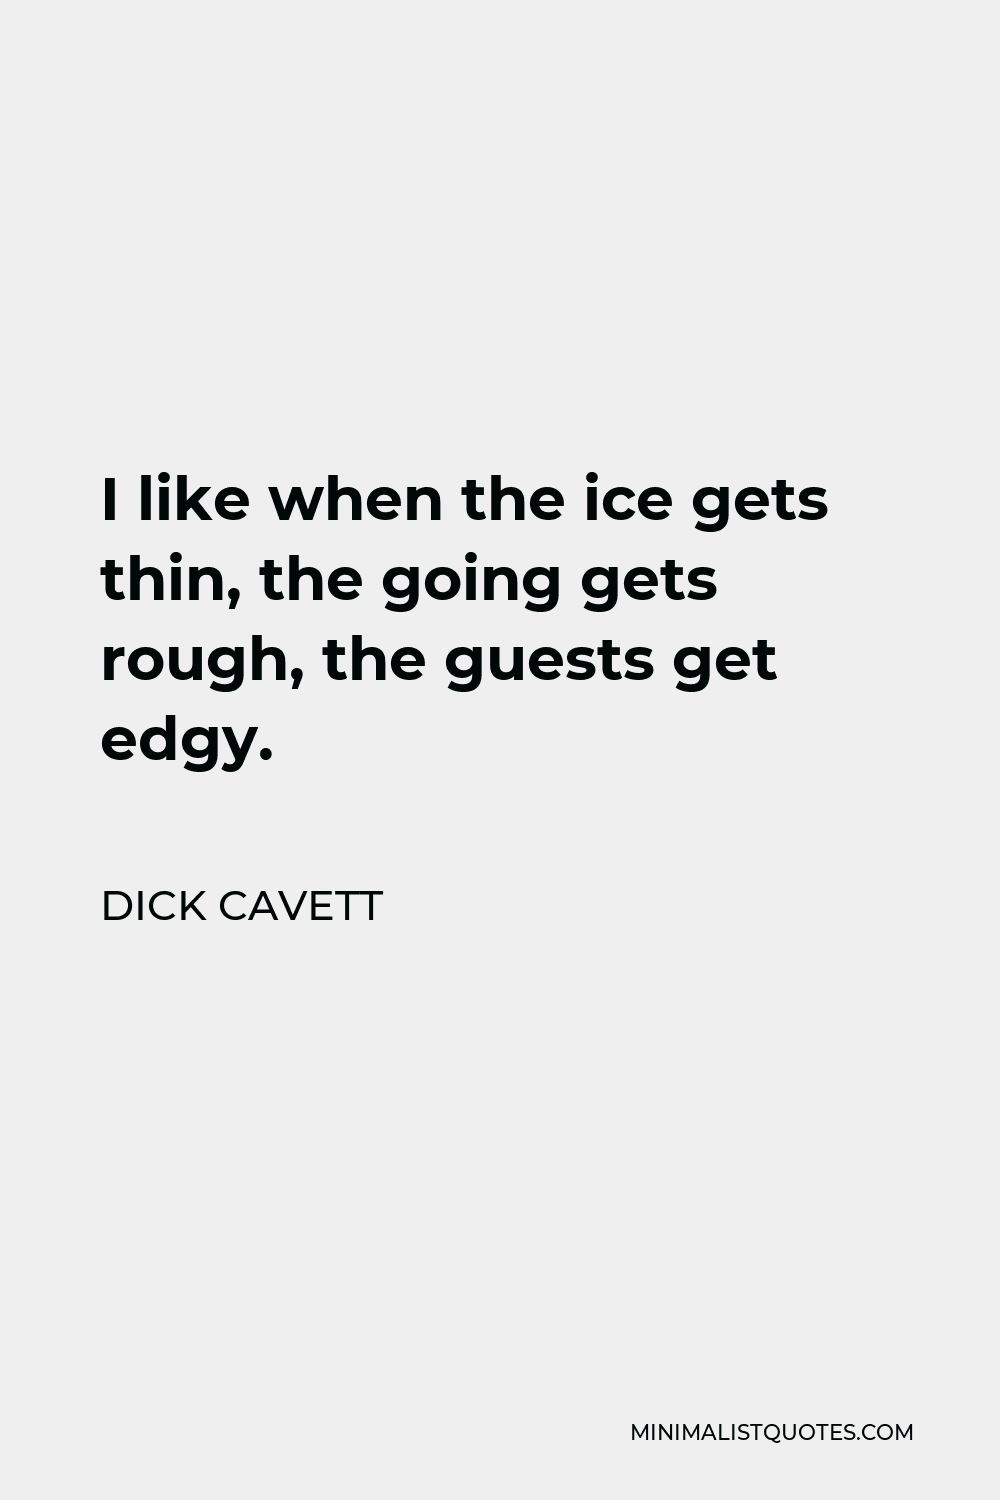 Dick Cavett Quote - I like when the ice gets thin, the going gets rough, the guests get edgy.